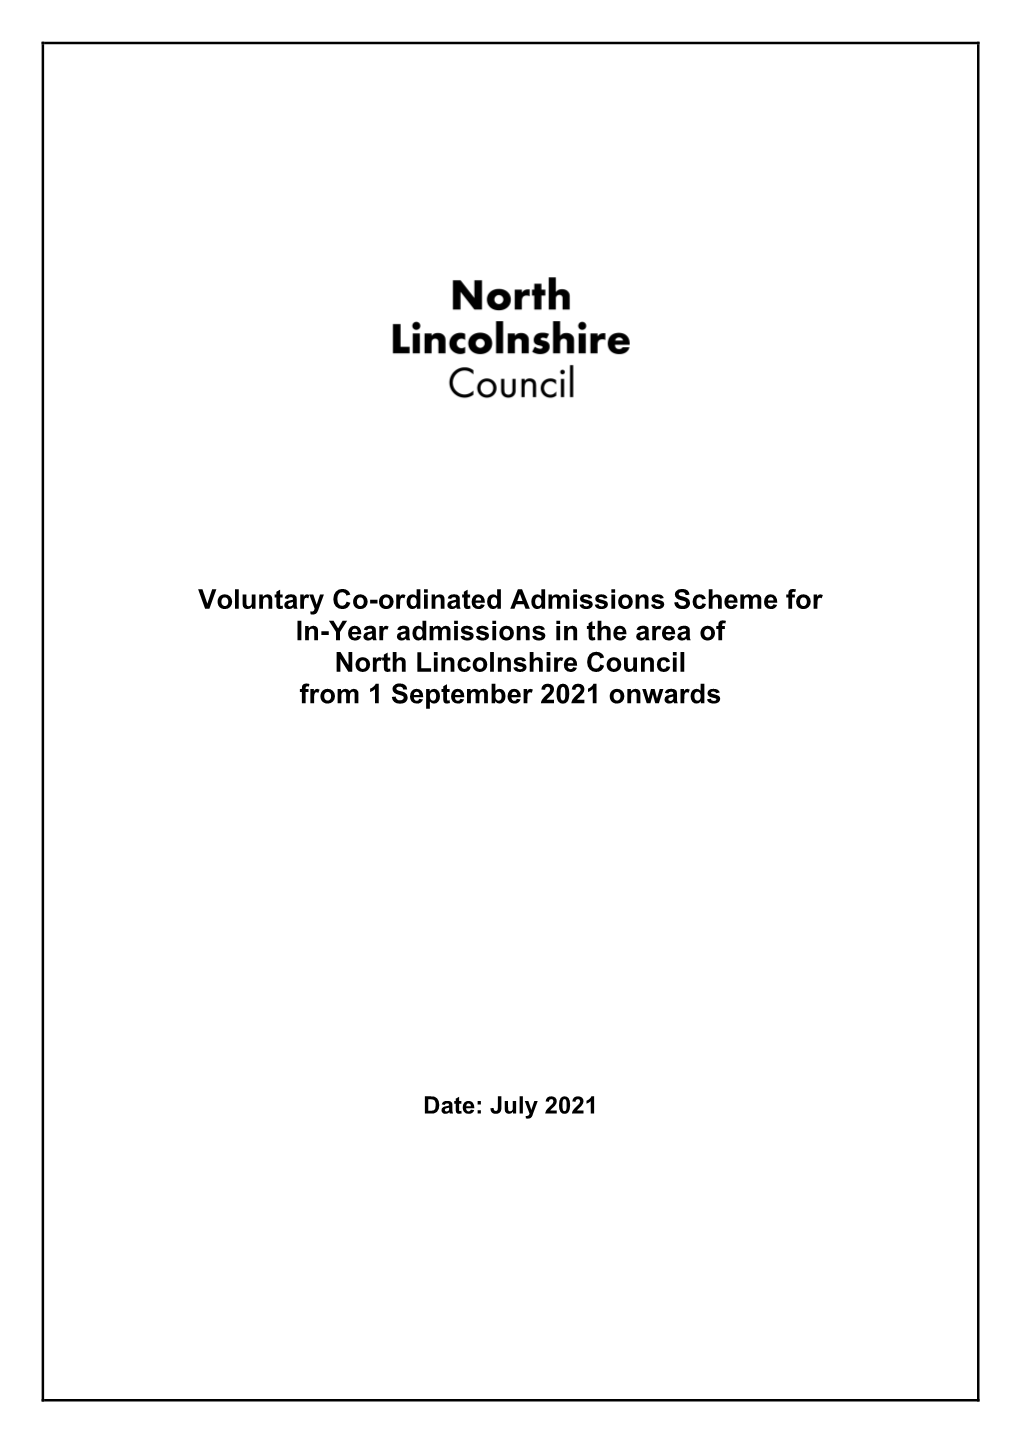 North Lincolnshire Co-Ordinated in Year Admission Scheme